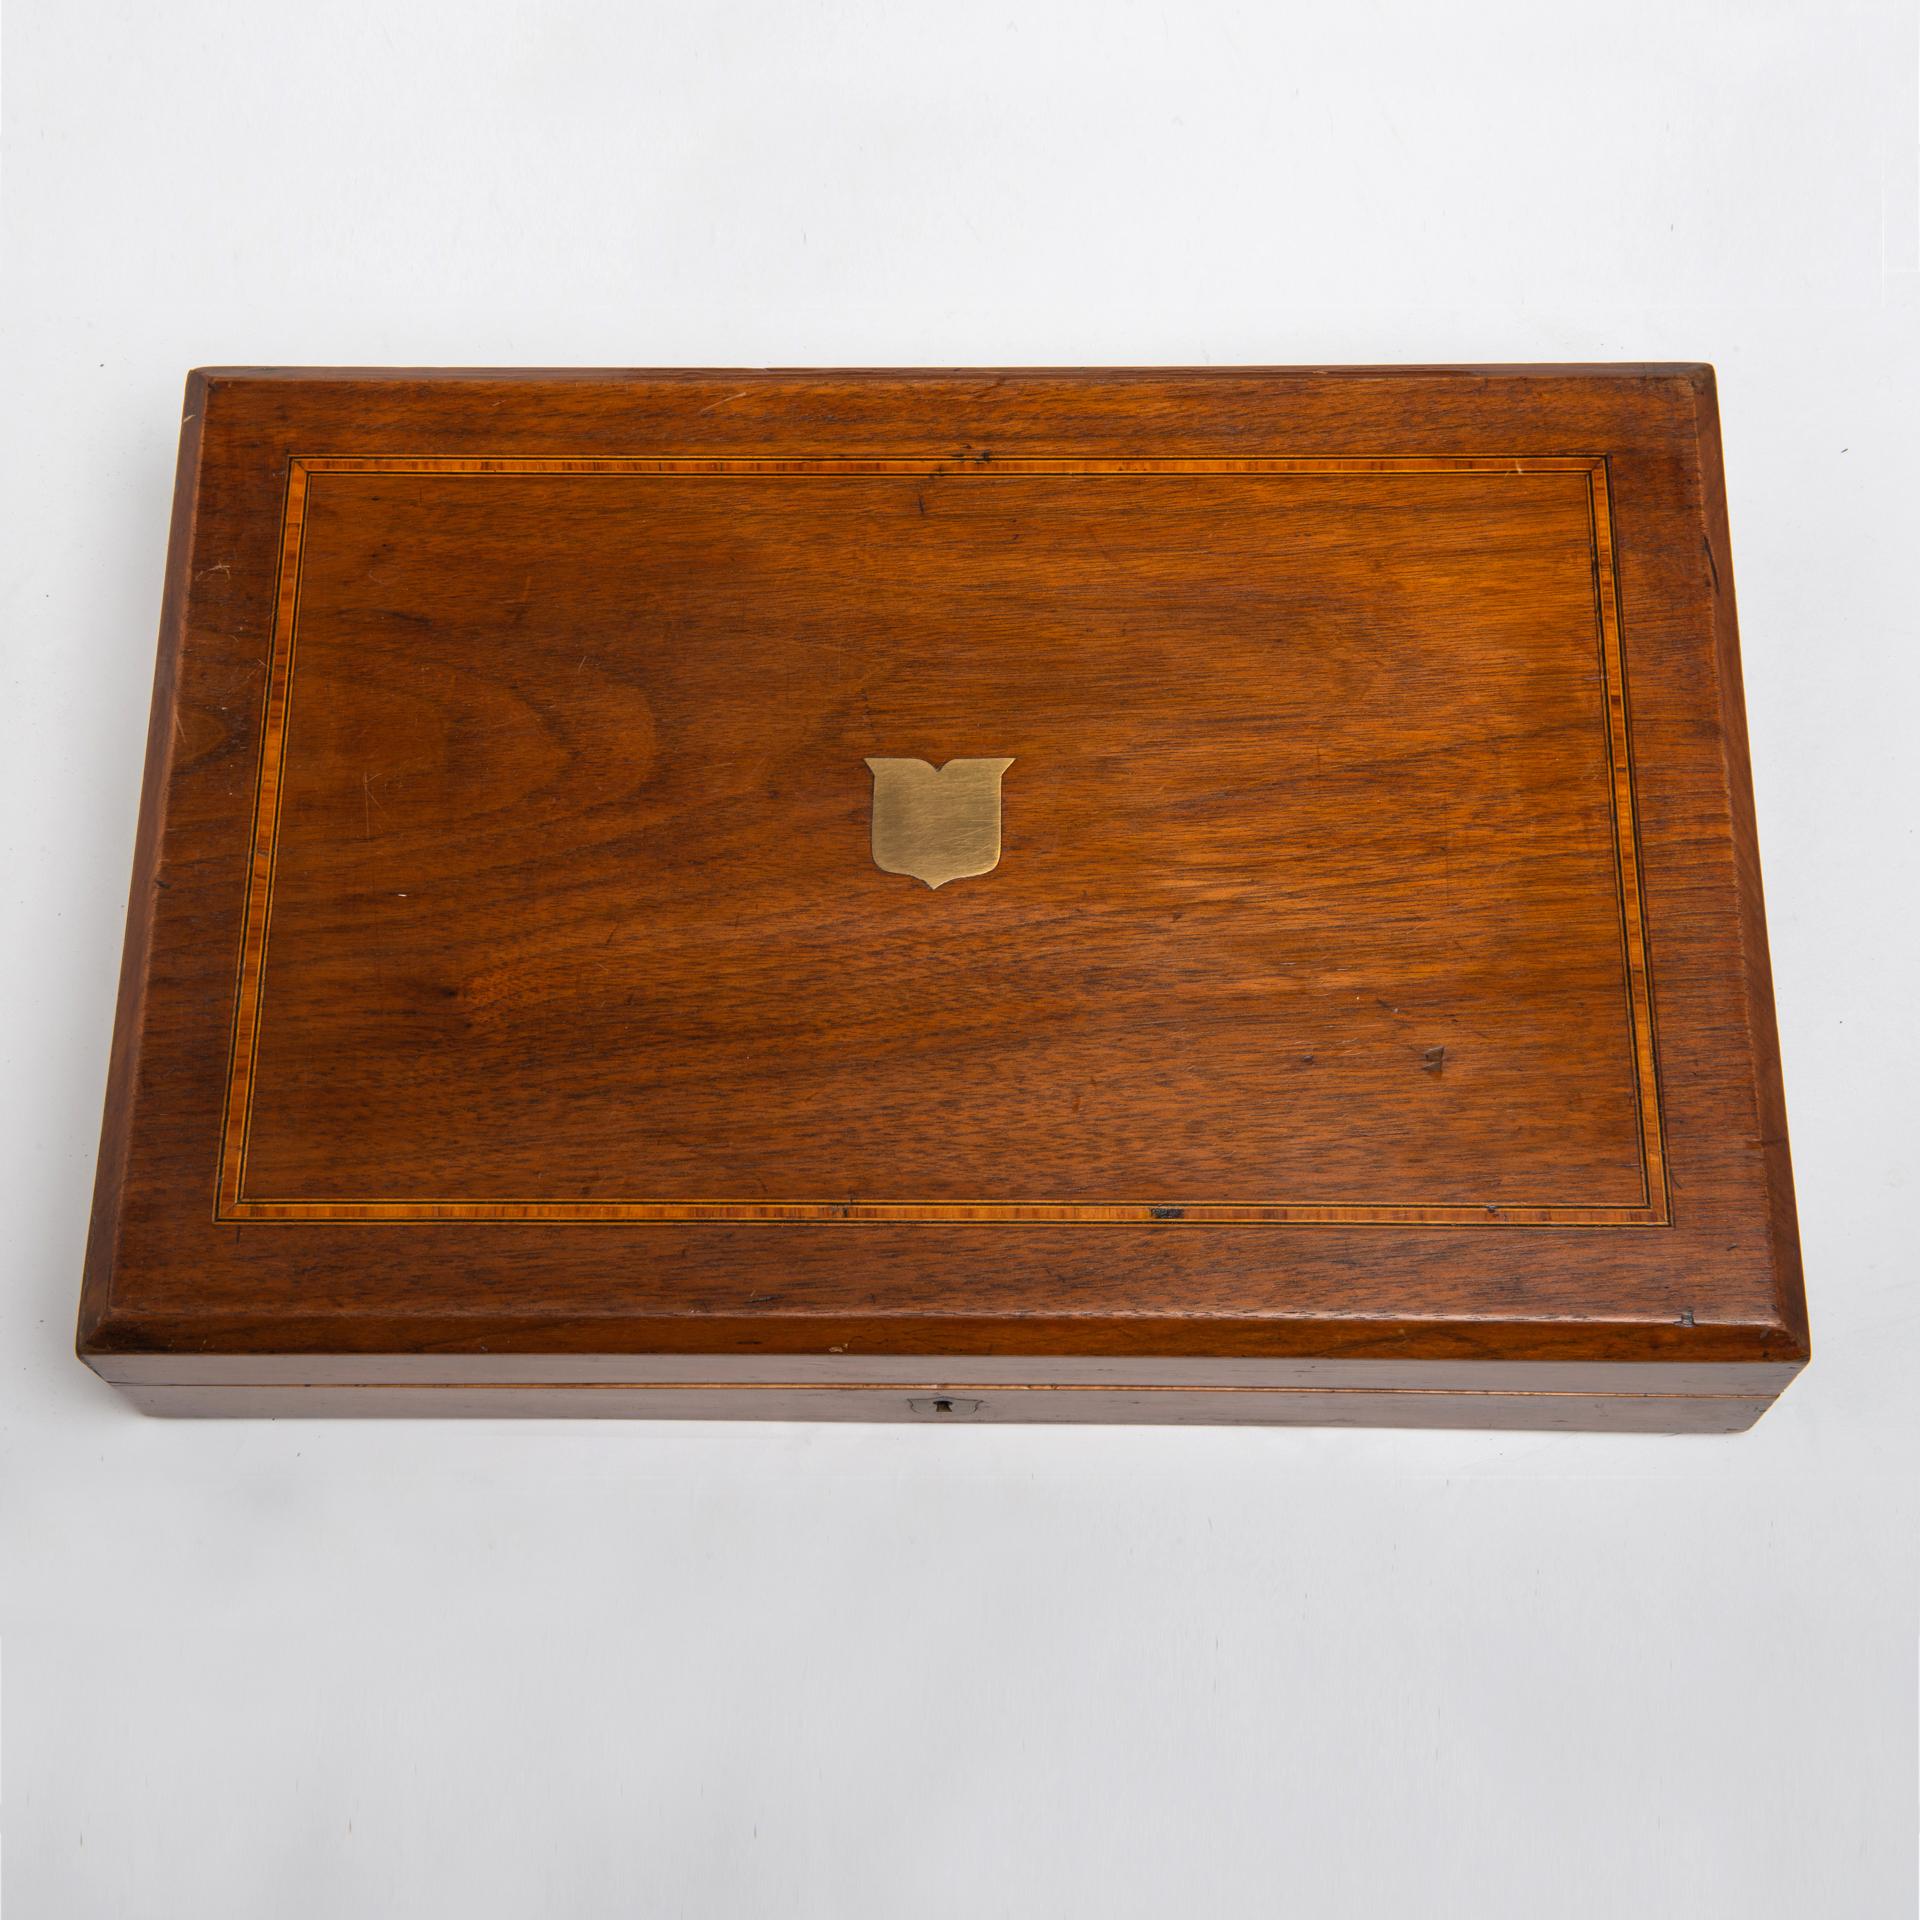 Antique Chess Storage Wooden Boxes In Excellent Condition For Sale In Alessandria, Piemonte